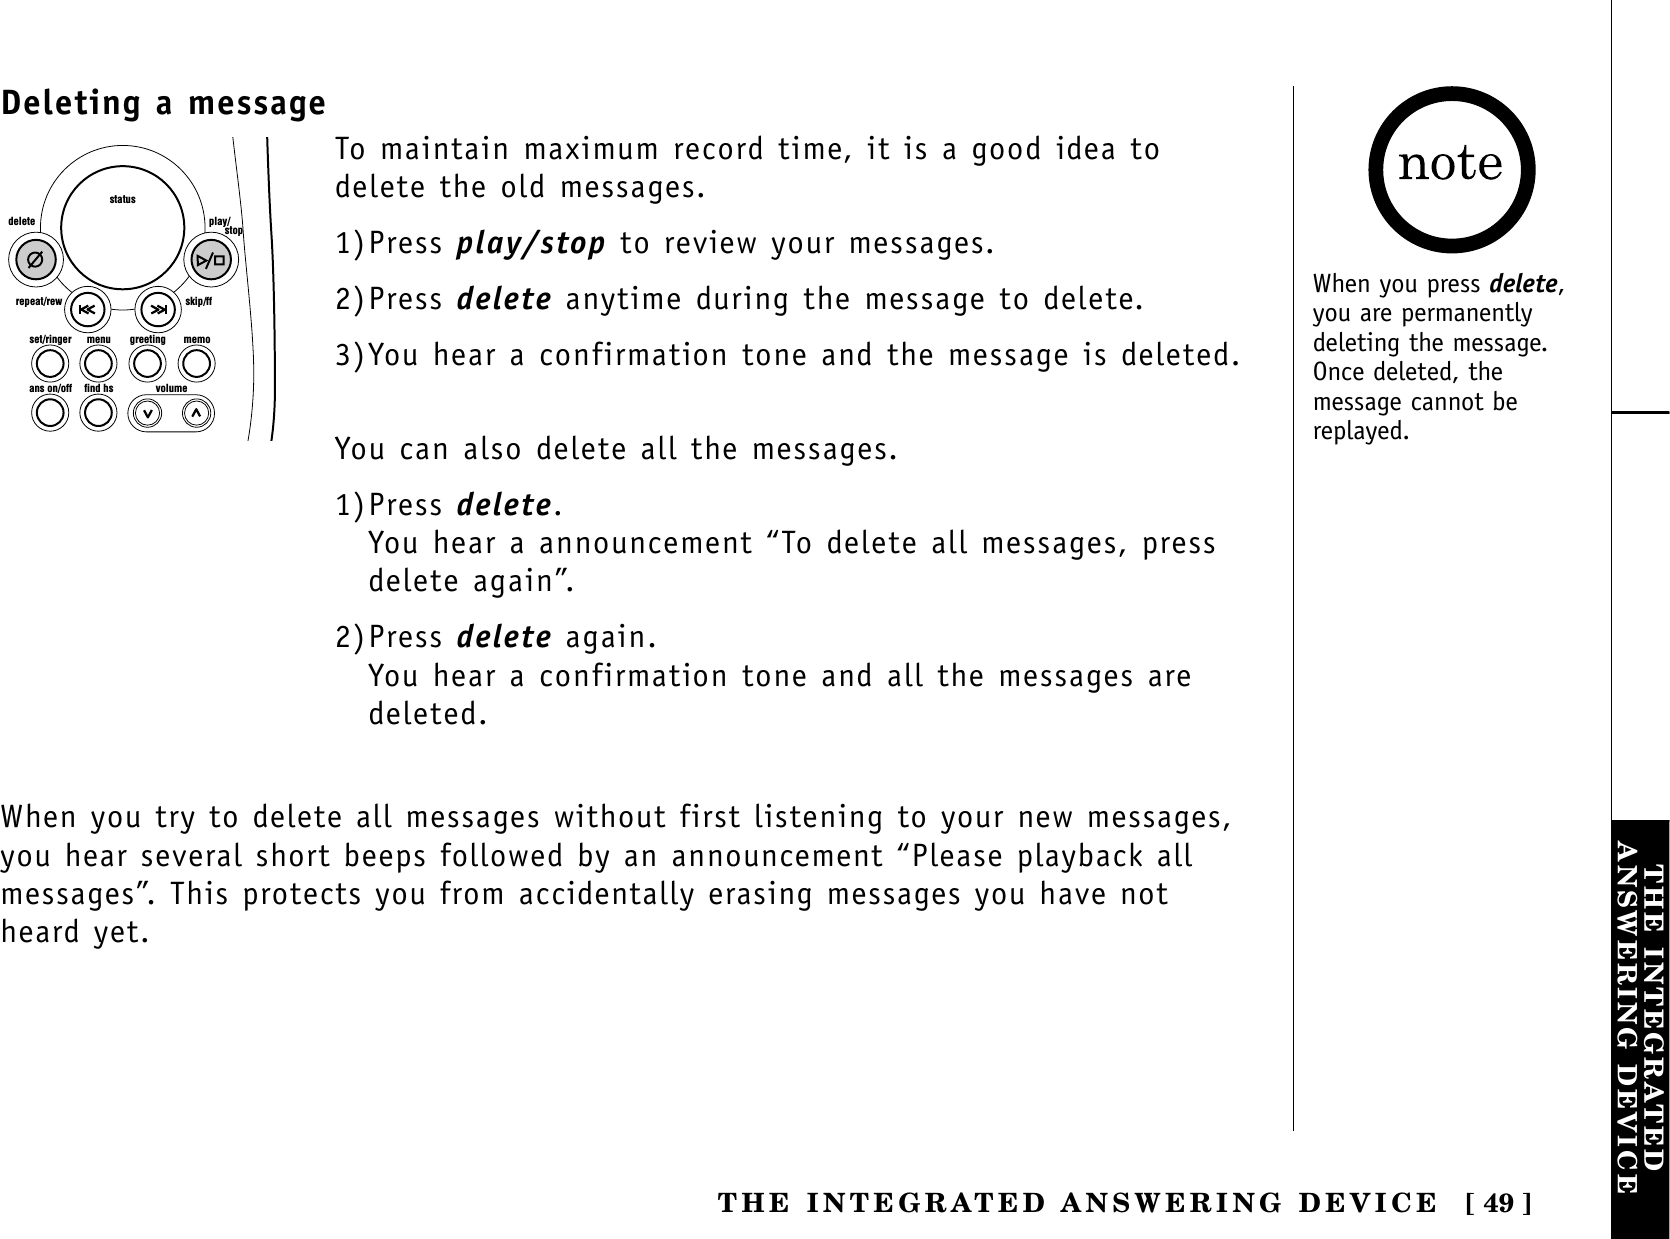 [ 49 ]THE INTEGRATEDANSWERING DEVICETHE INTEGRATED ANSWERING DEVICEDeleting a messageset/ringer menuans on/off find hs volumegreeting memoskip/ffrepeat/rewdelete play/      stopstatusTo maintain maximum record time, it is a good idea todelete the old messages. 1)Press play/stop to review your messages.2)Press delete anytime during the message to delete.3)You hear a confirmation tone and the message is deleted.You can also delete all the messages.1)Press delete.You hear a announcement “To delete all messages, pressdelete again”.2)Press delete again.You hear a confirmation tone and all the messages aredeleted.When you try to delete all messages without first listening to your new messages,you hear several short beeps followed by an announcement “Please playback allmessages”. This protects you from accidentally erasing messages you have notheard yet.When you press delete,you are permanentlydeleting the message.Once deleted, themessage cannot bereplayed.